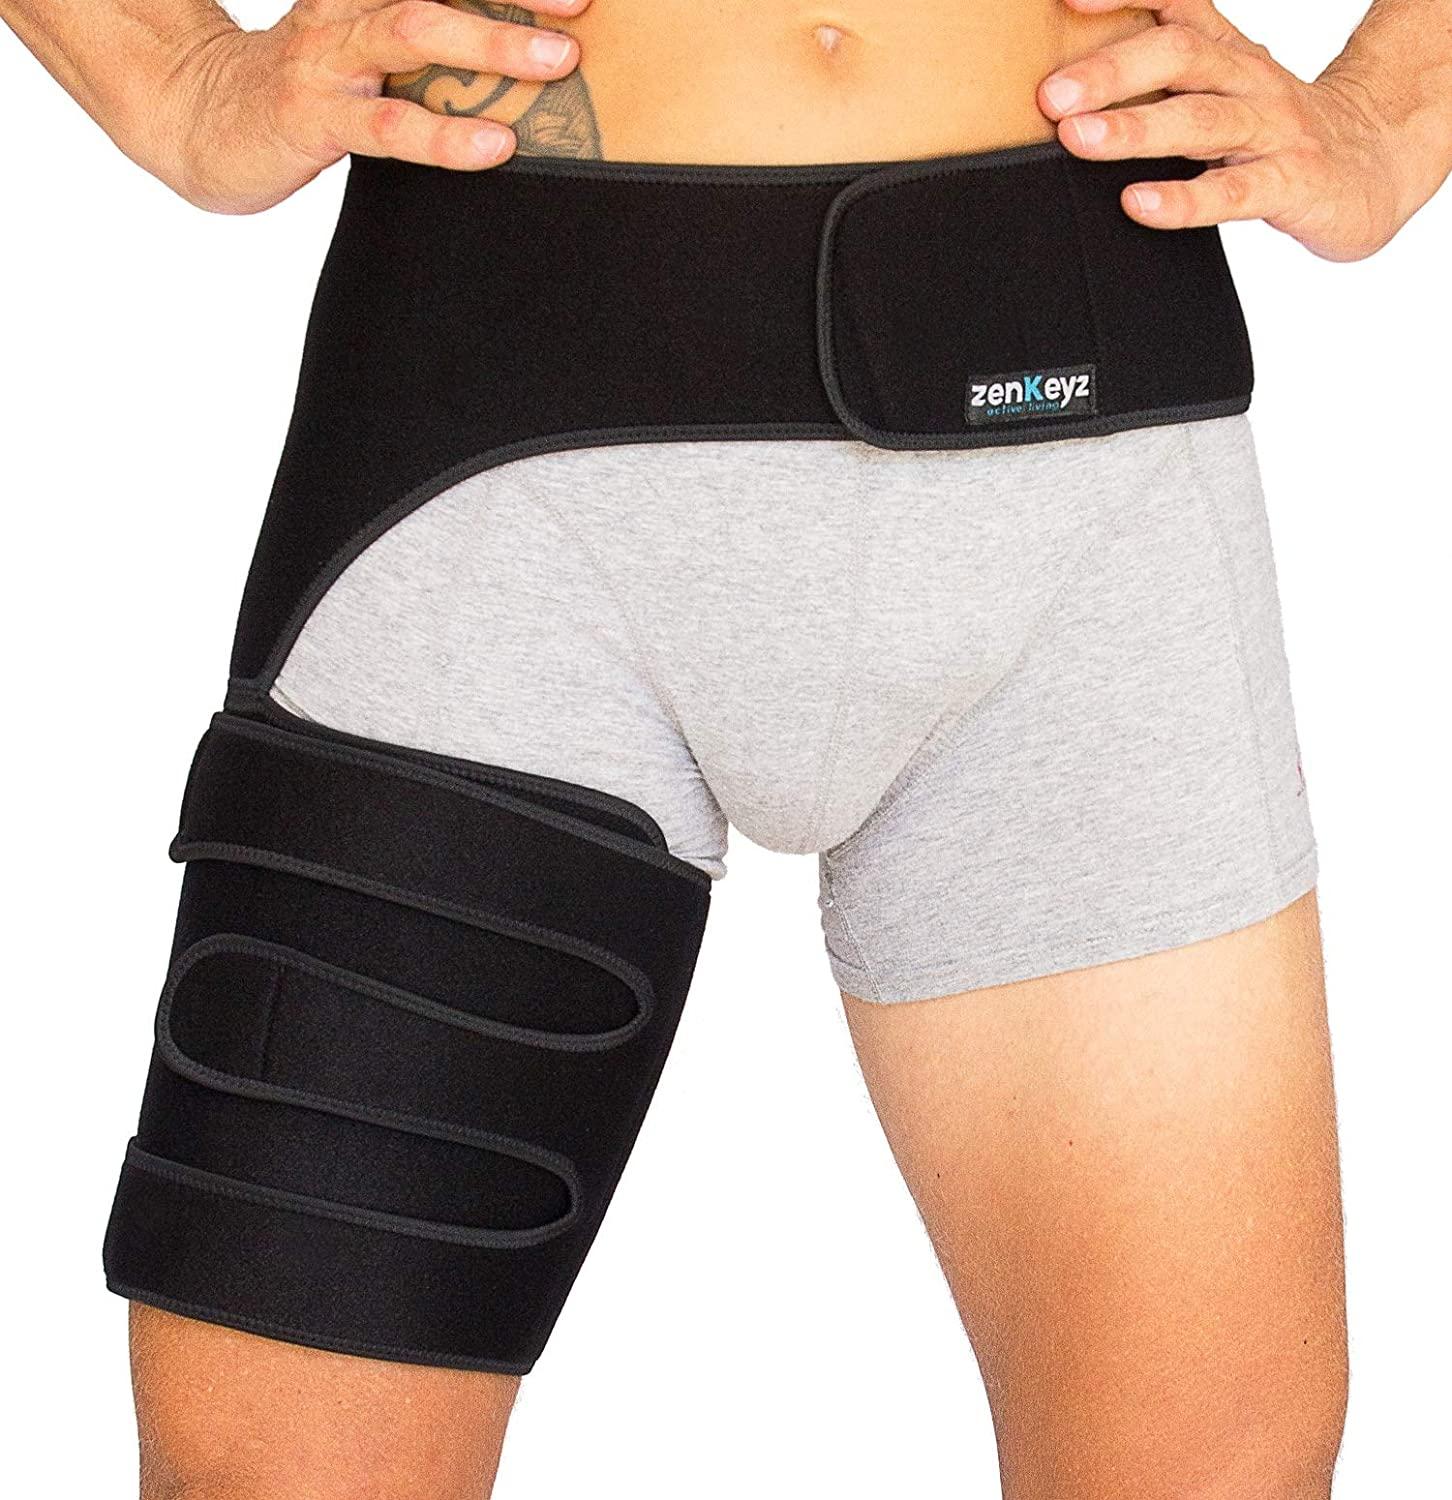 Double Hip Brace for Sciatica and Joint Pain Relief